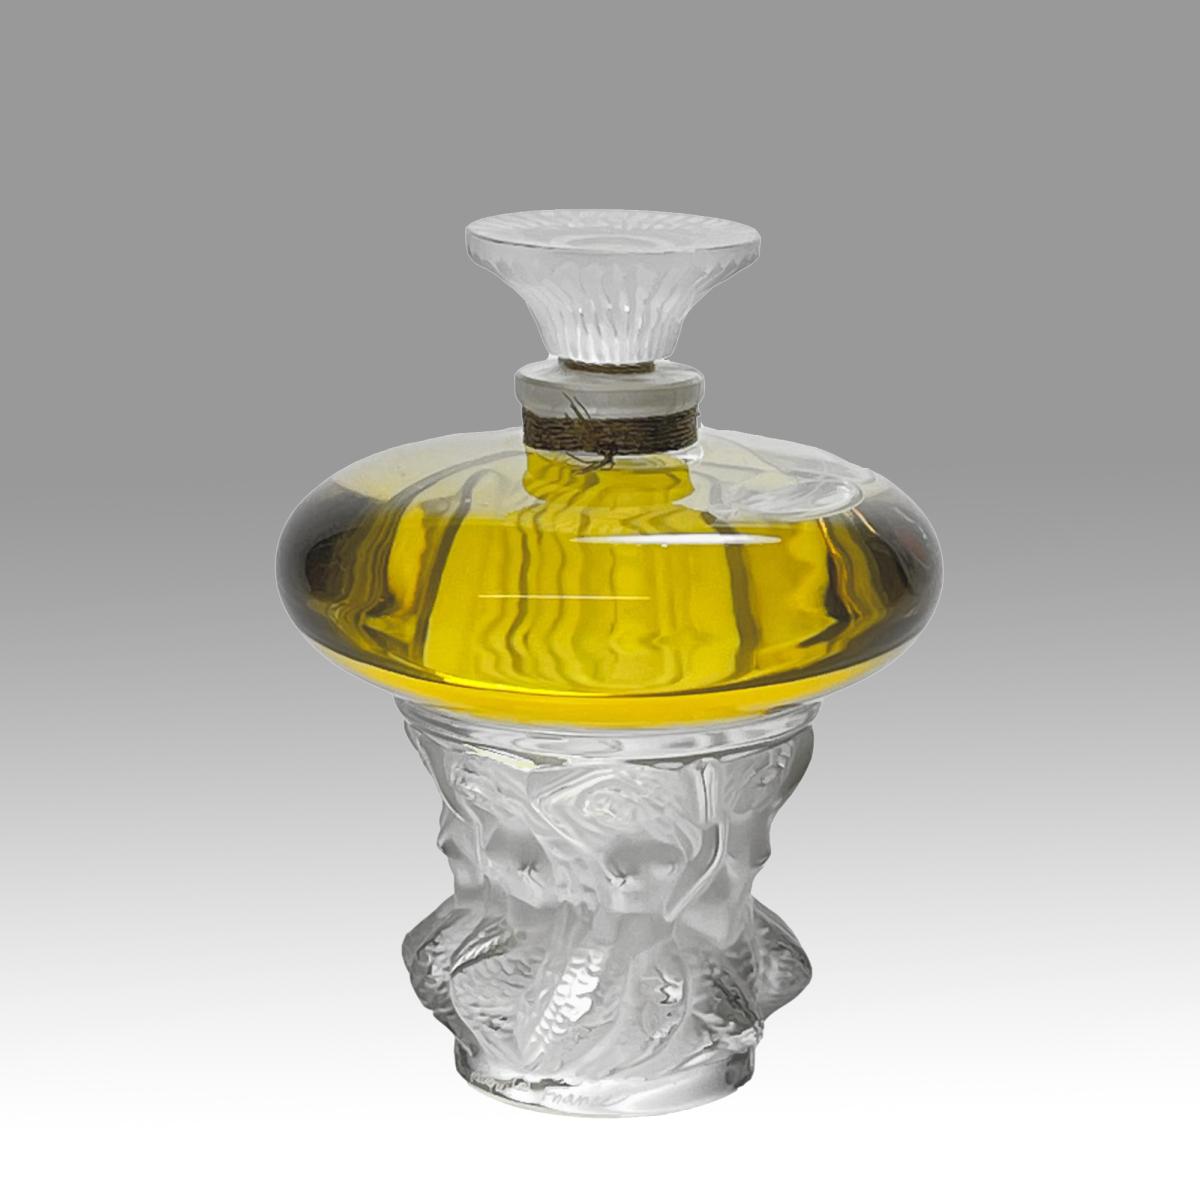 Limited Edition Perfume Bottle entitled  "Les Sirens" by Marie Claude Lalique